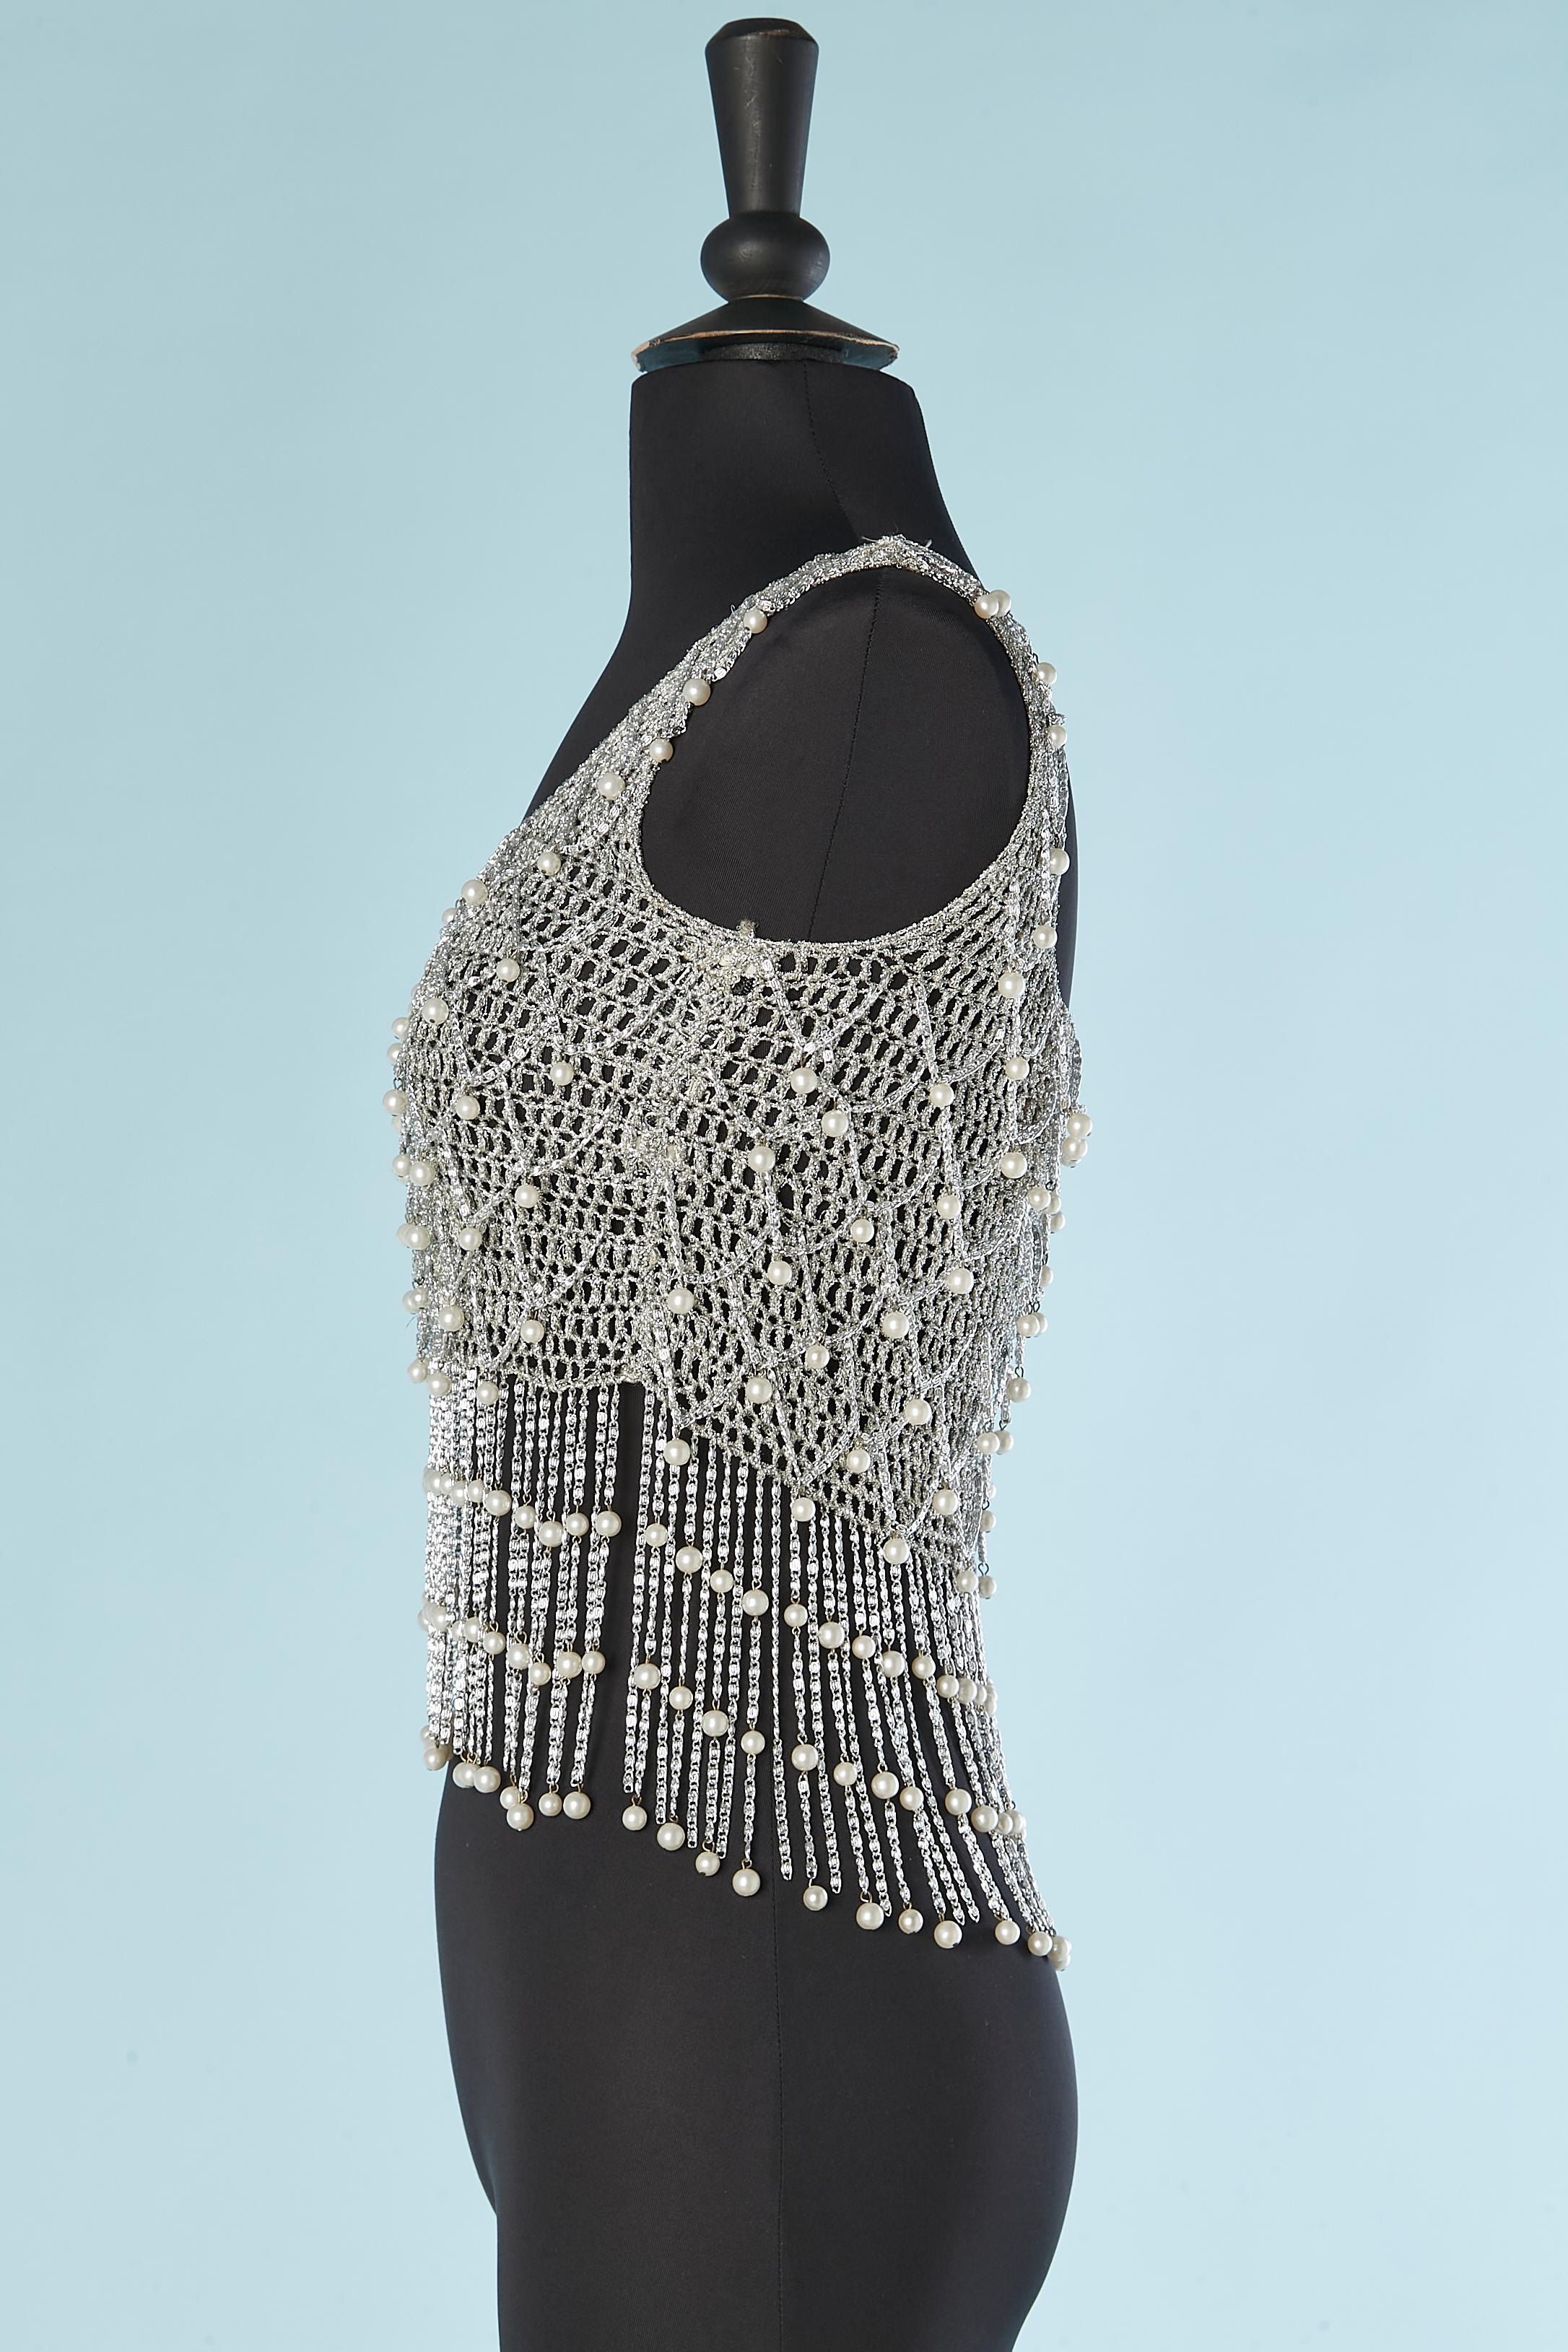 Silver Tank top in silver lurex, knit and pearls mix with chain  Loris Azzaro 1970's 